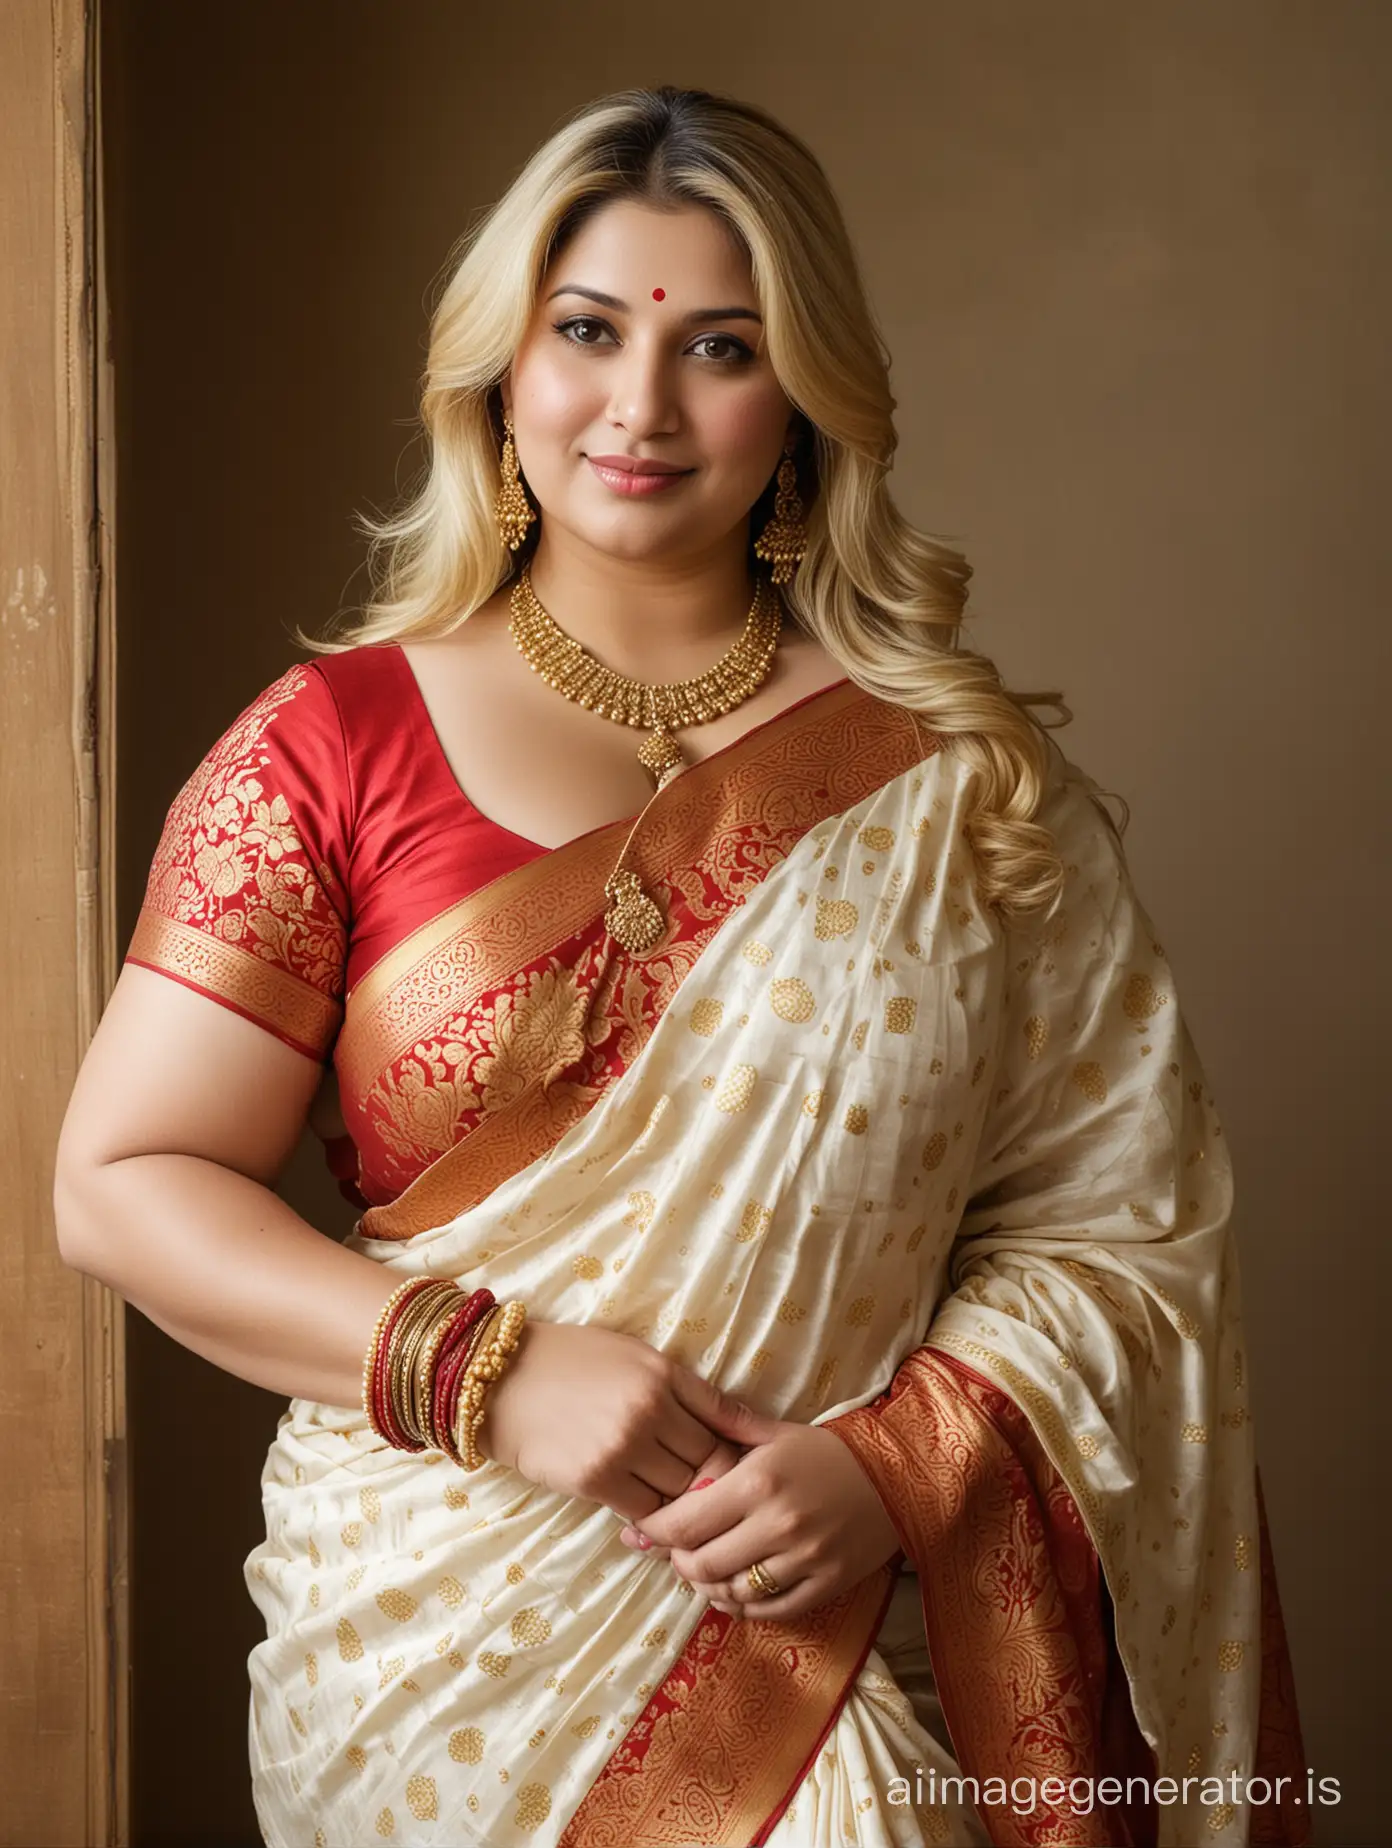 Generate full body  image of a 41 year old very busty fatty breast , big fatty thighs, big fatty hand arm, big fatty ass and curvy completely  American mature very fatty chubby obese woman and very fair white skin with blonde hair wearing Bengali traditional wearing style Banarasi saree and wearing sindur in forehead and red and white bangles in hand and wearing gold necklace with gold jewelry in India puja program 